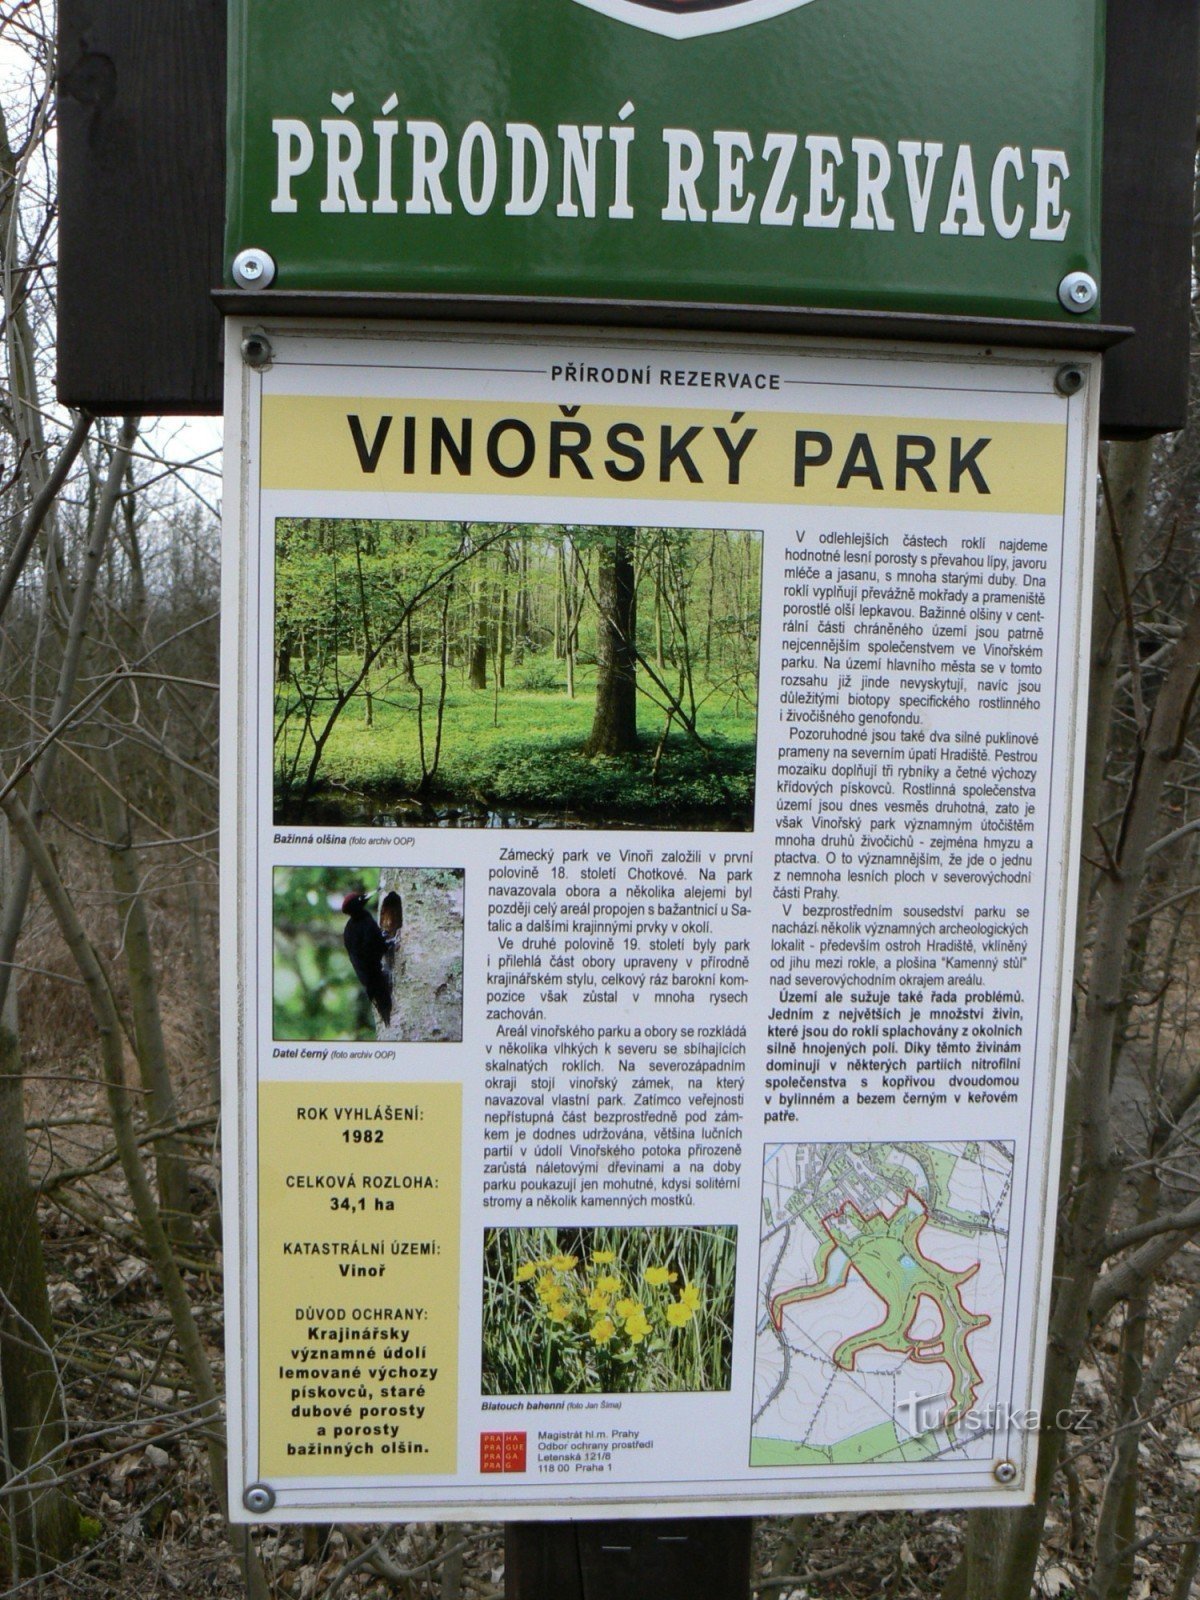 Designation of the park from the Satalická pheasant